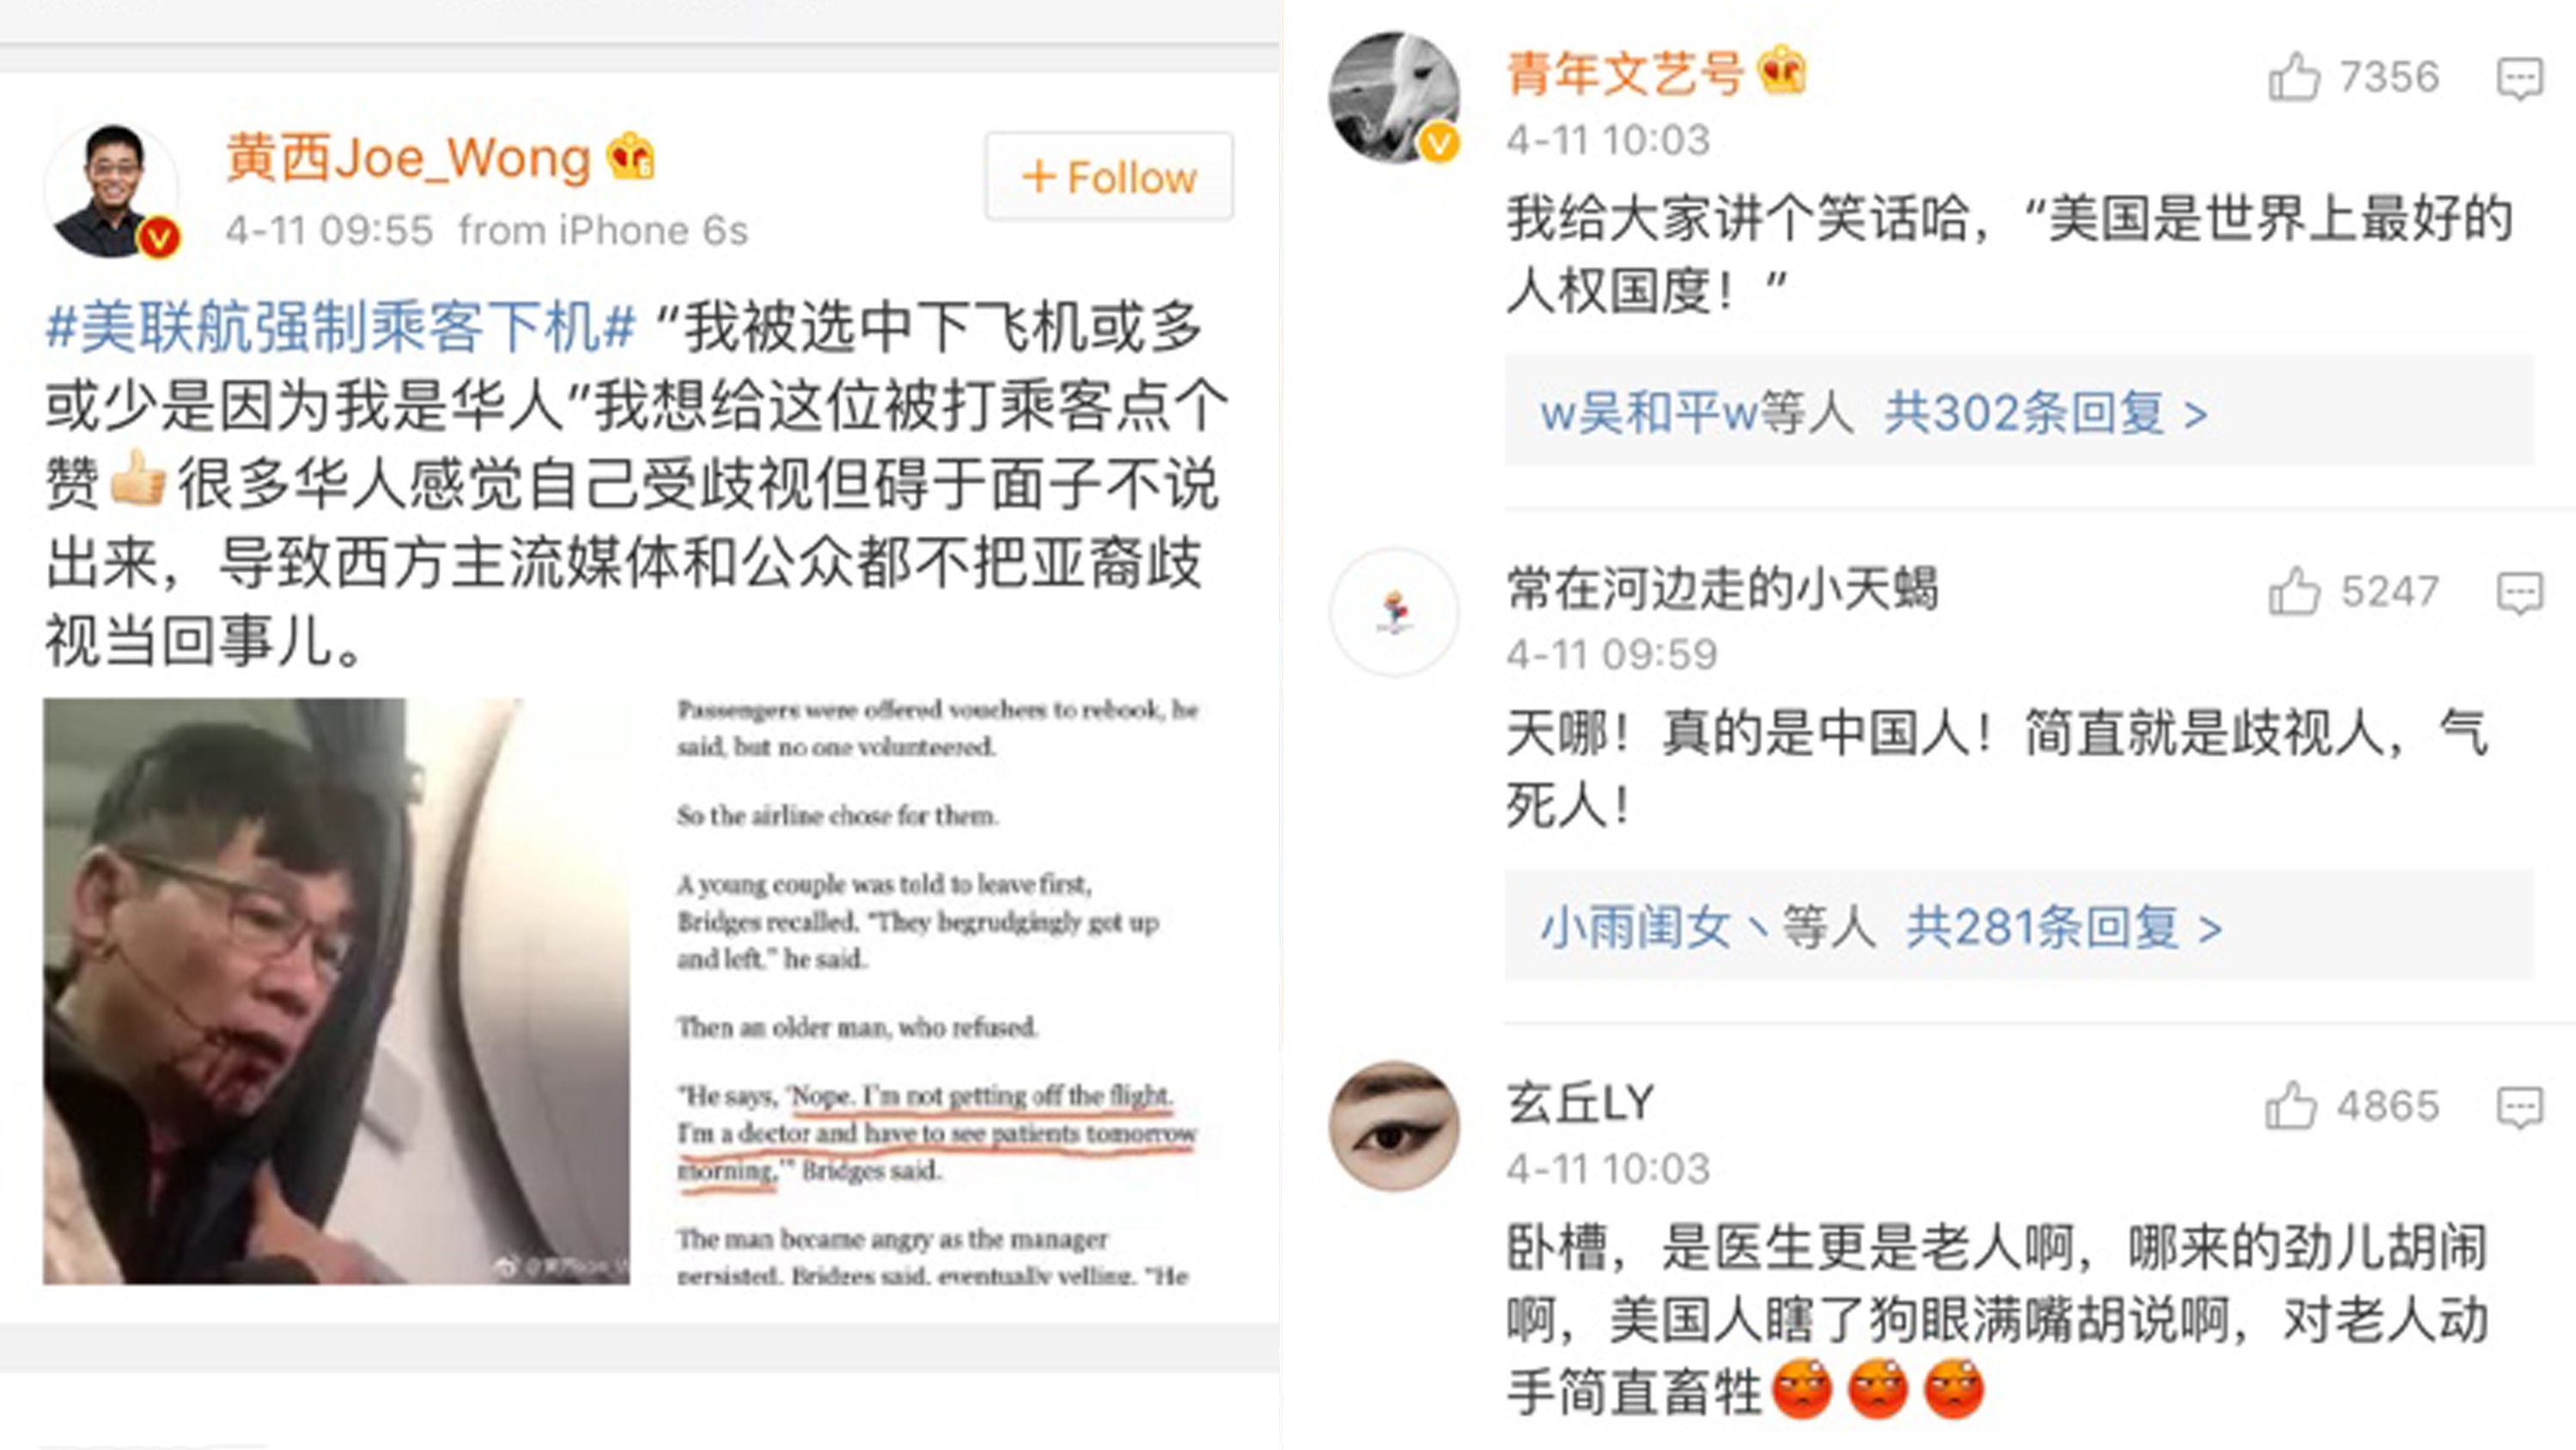 Comedian Joe Wong was among many Chinese commenters on social media denouncing United's treatment of an Asian passenger. Wong denounced the airline for "discrimination" against Asians. 